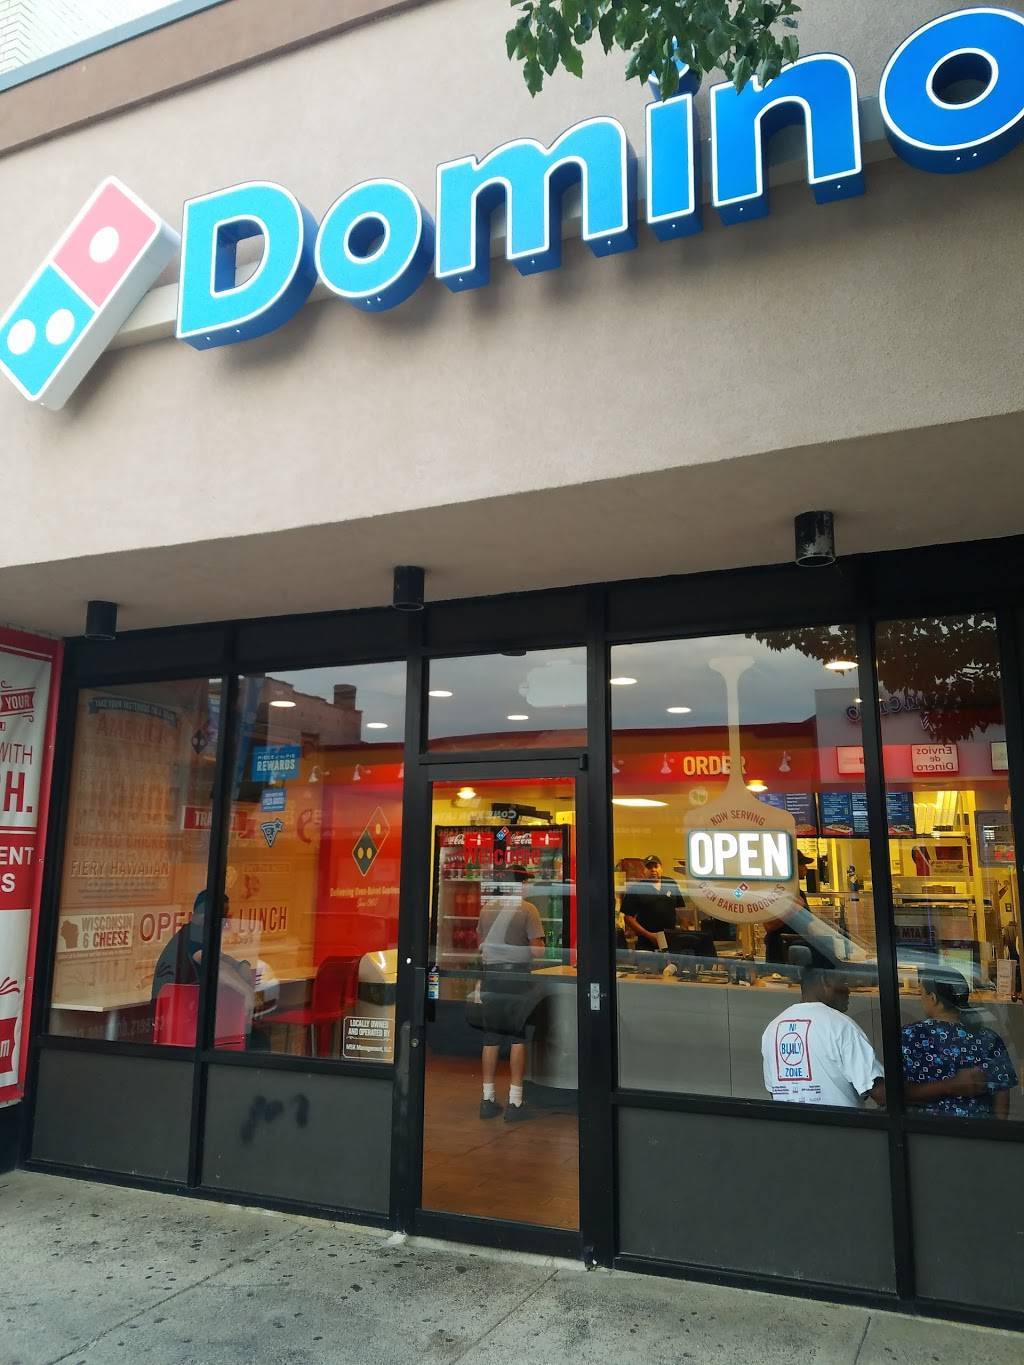 Dominos Pizza | meal delivery | 337 Main St, Hackensack, NJ 07601, USA | 2014876262 OR +1 201-487-6262